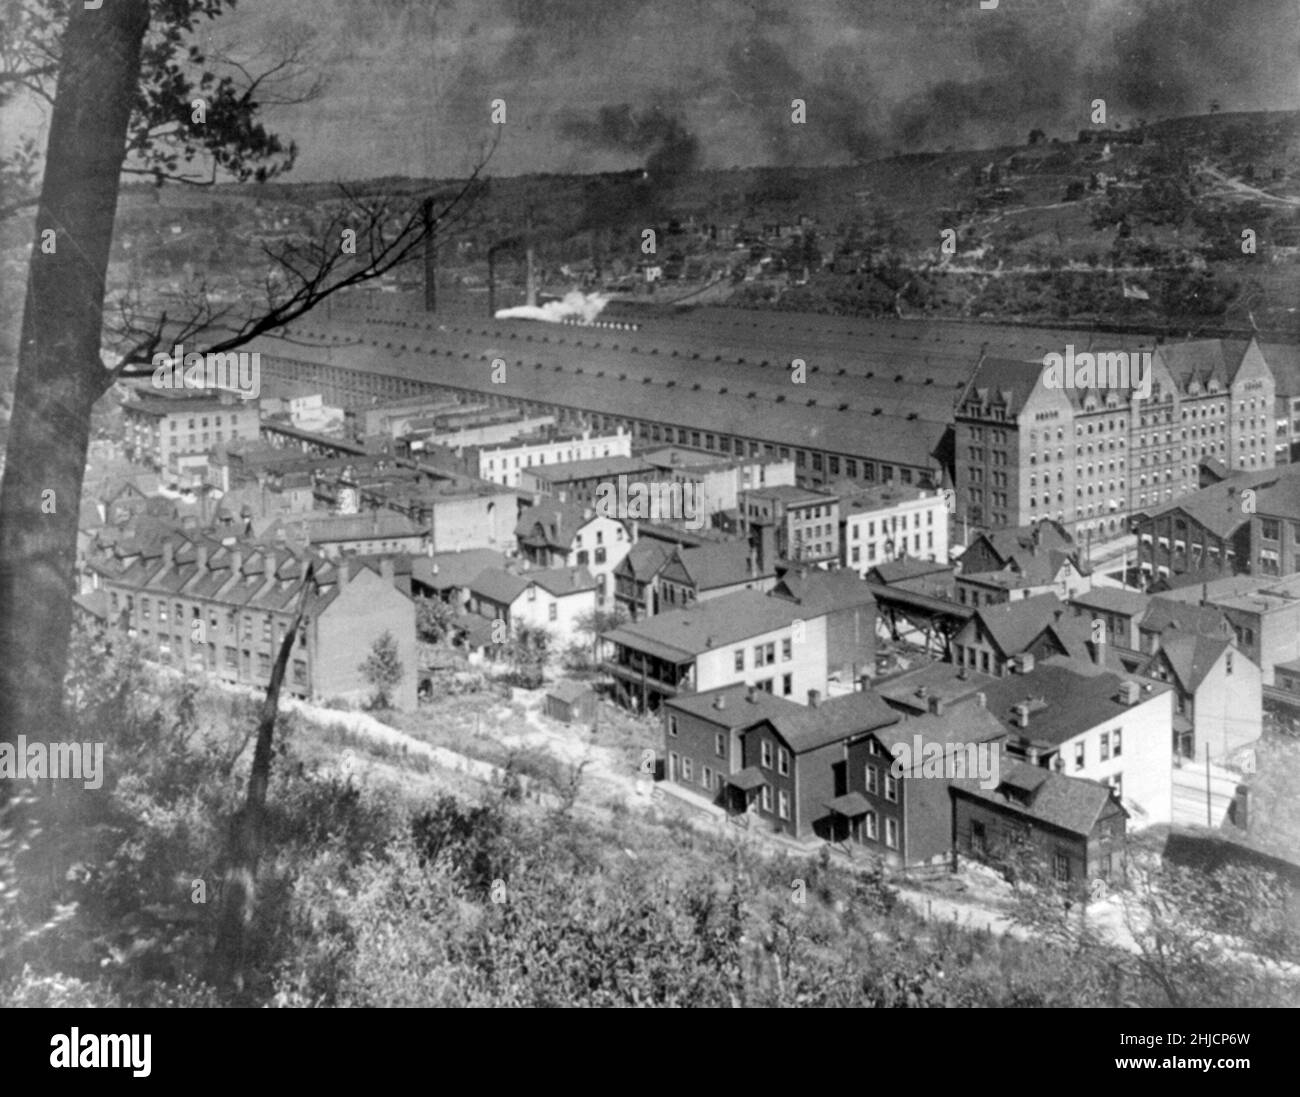 Westinghouse Electrical Works, East Pittsburg, Pa., U.S.A. Stereograph showing an elevated view of a cluster of buildings. Keystone View Company, 1905. Stock Photo